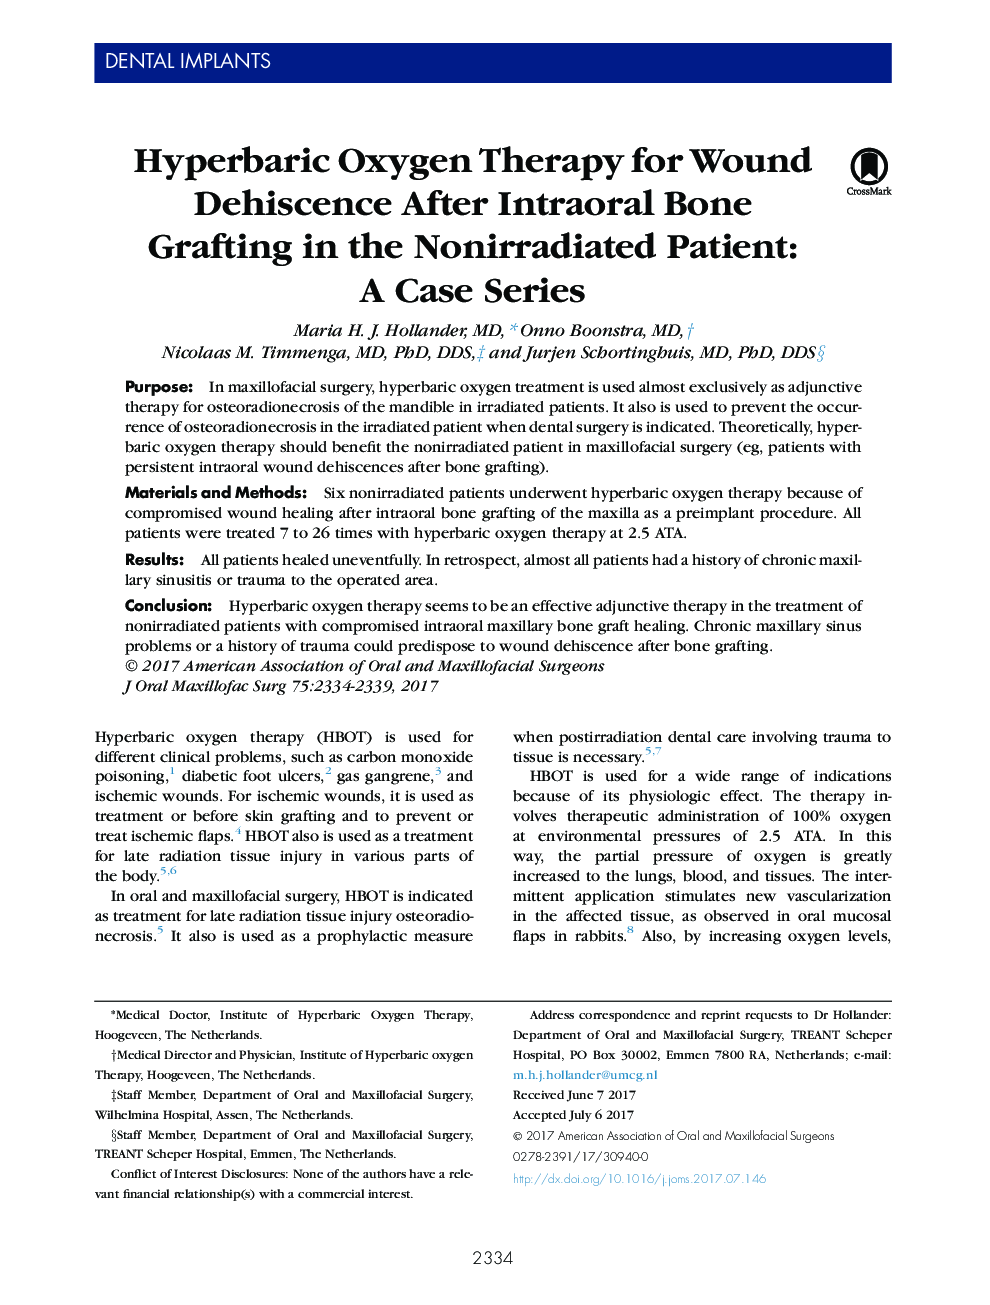 Hyperbaric Oxygen Therapy for Wound Dehiscence After Intraoral Bone Grafting in the Nonirradiated Patient: A Case Series